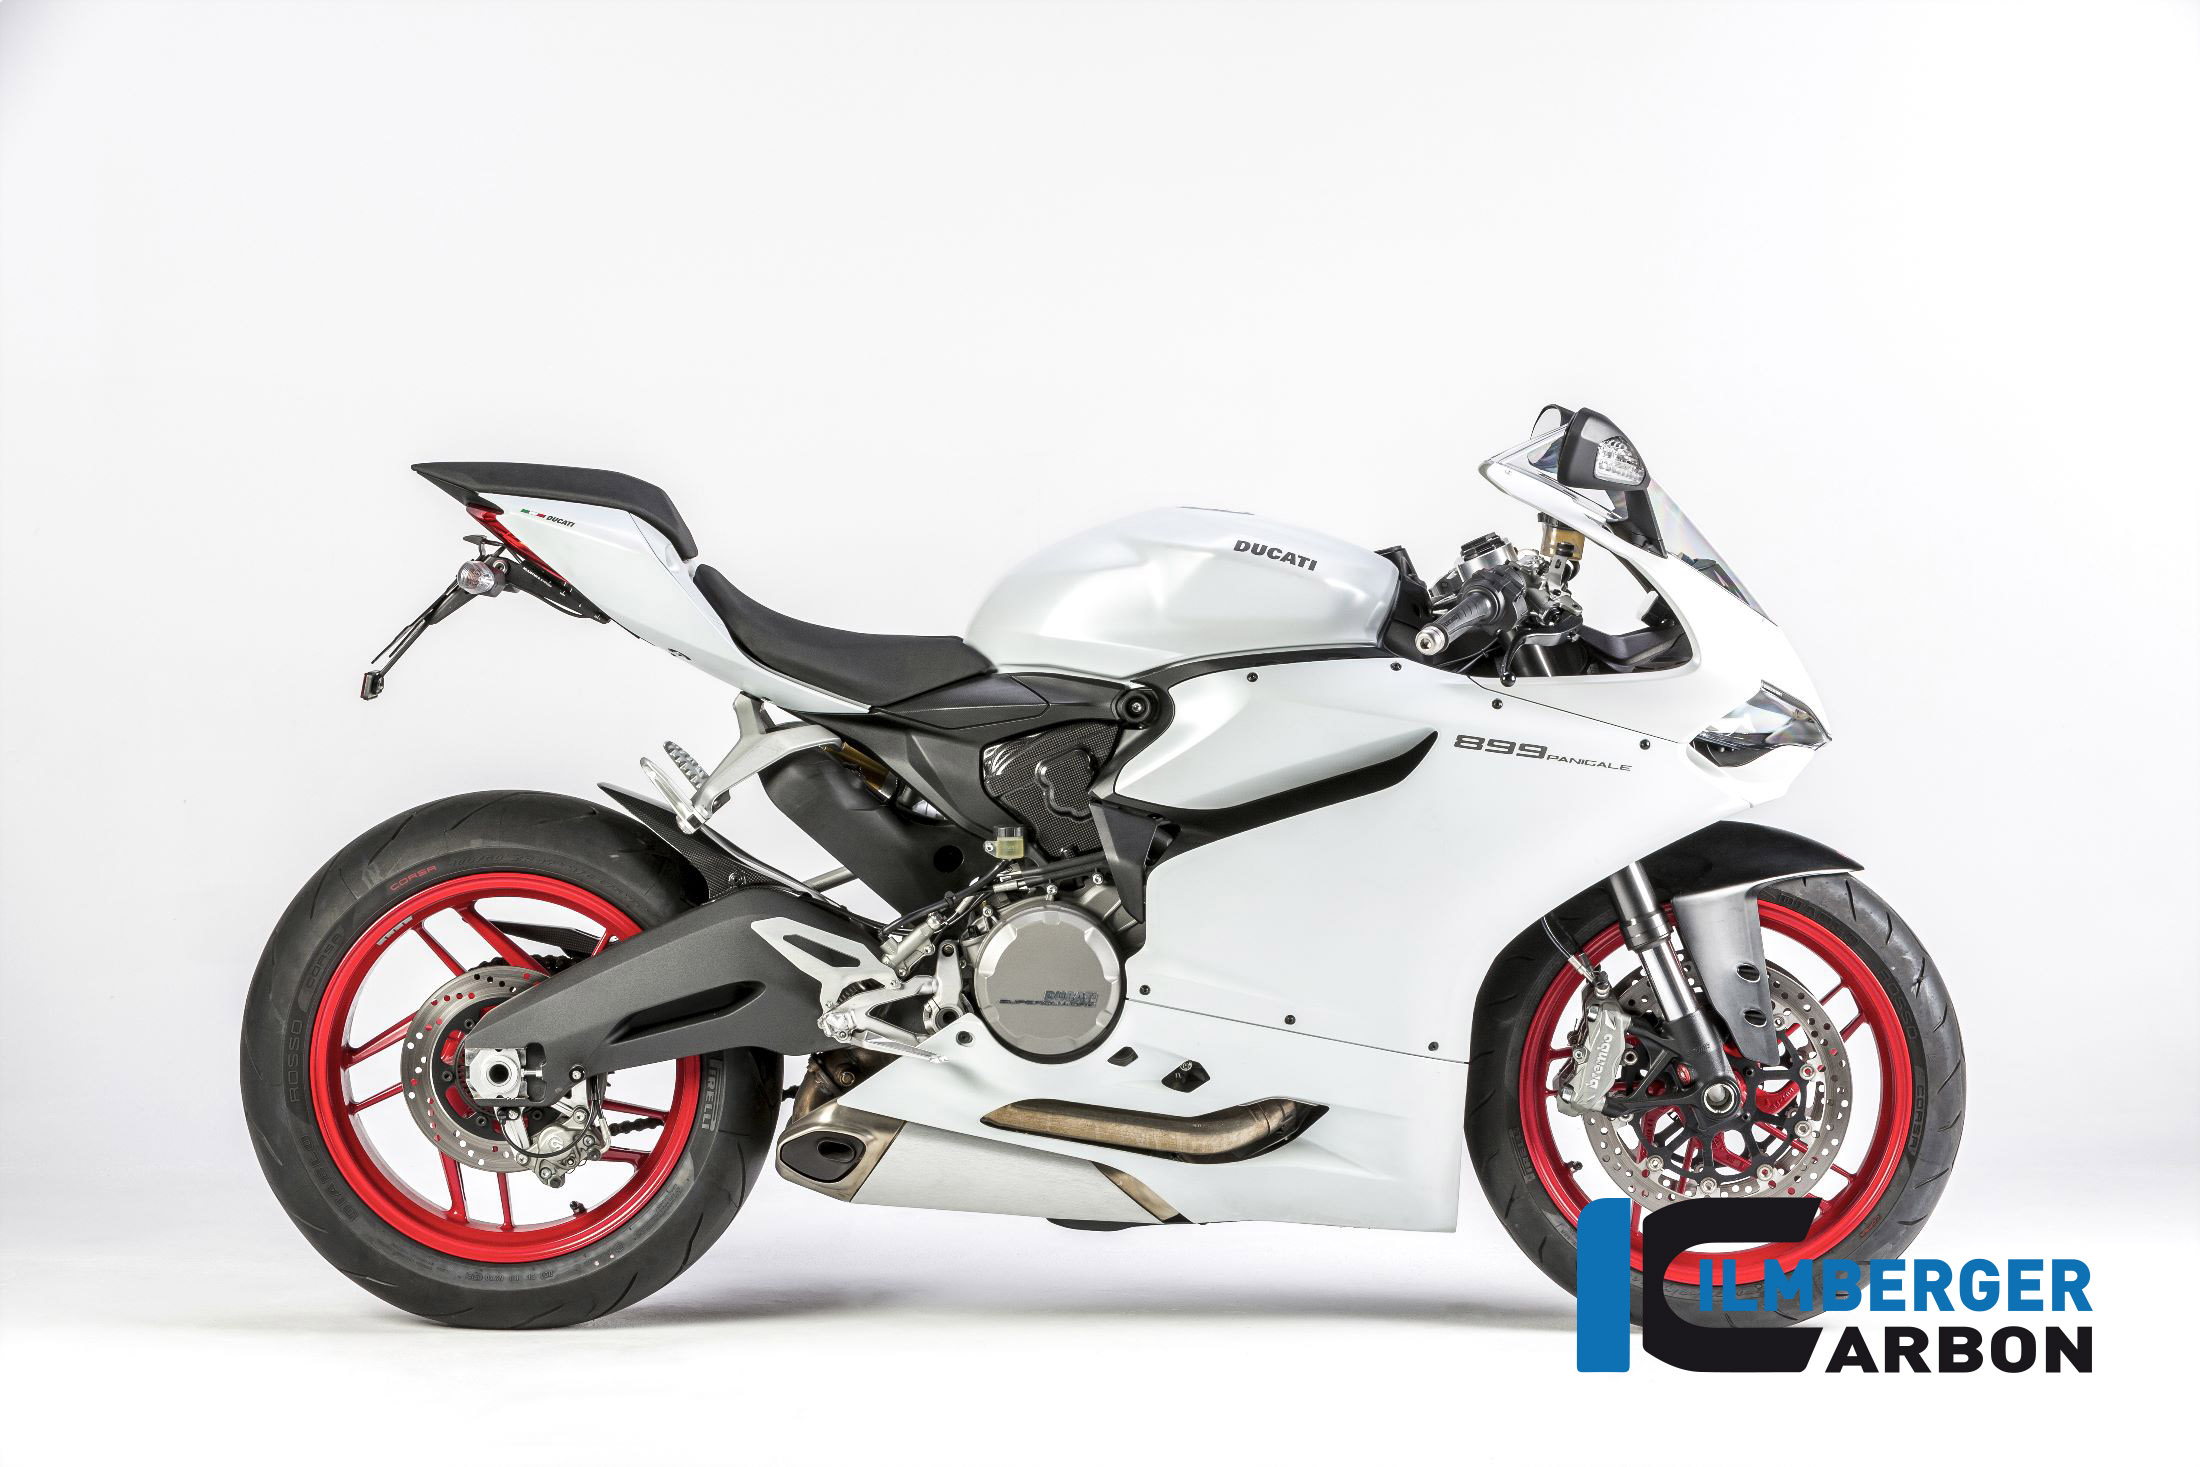 Panigale 899 (13-14) Ilmberger Carbon